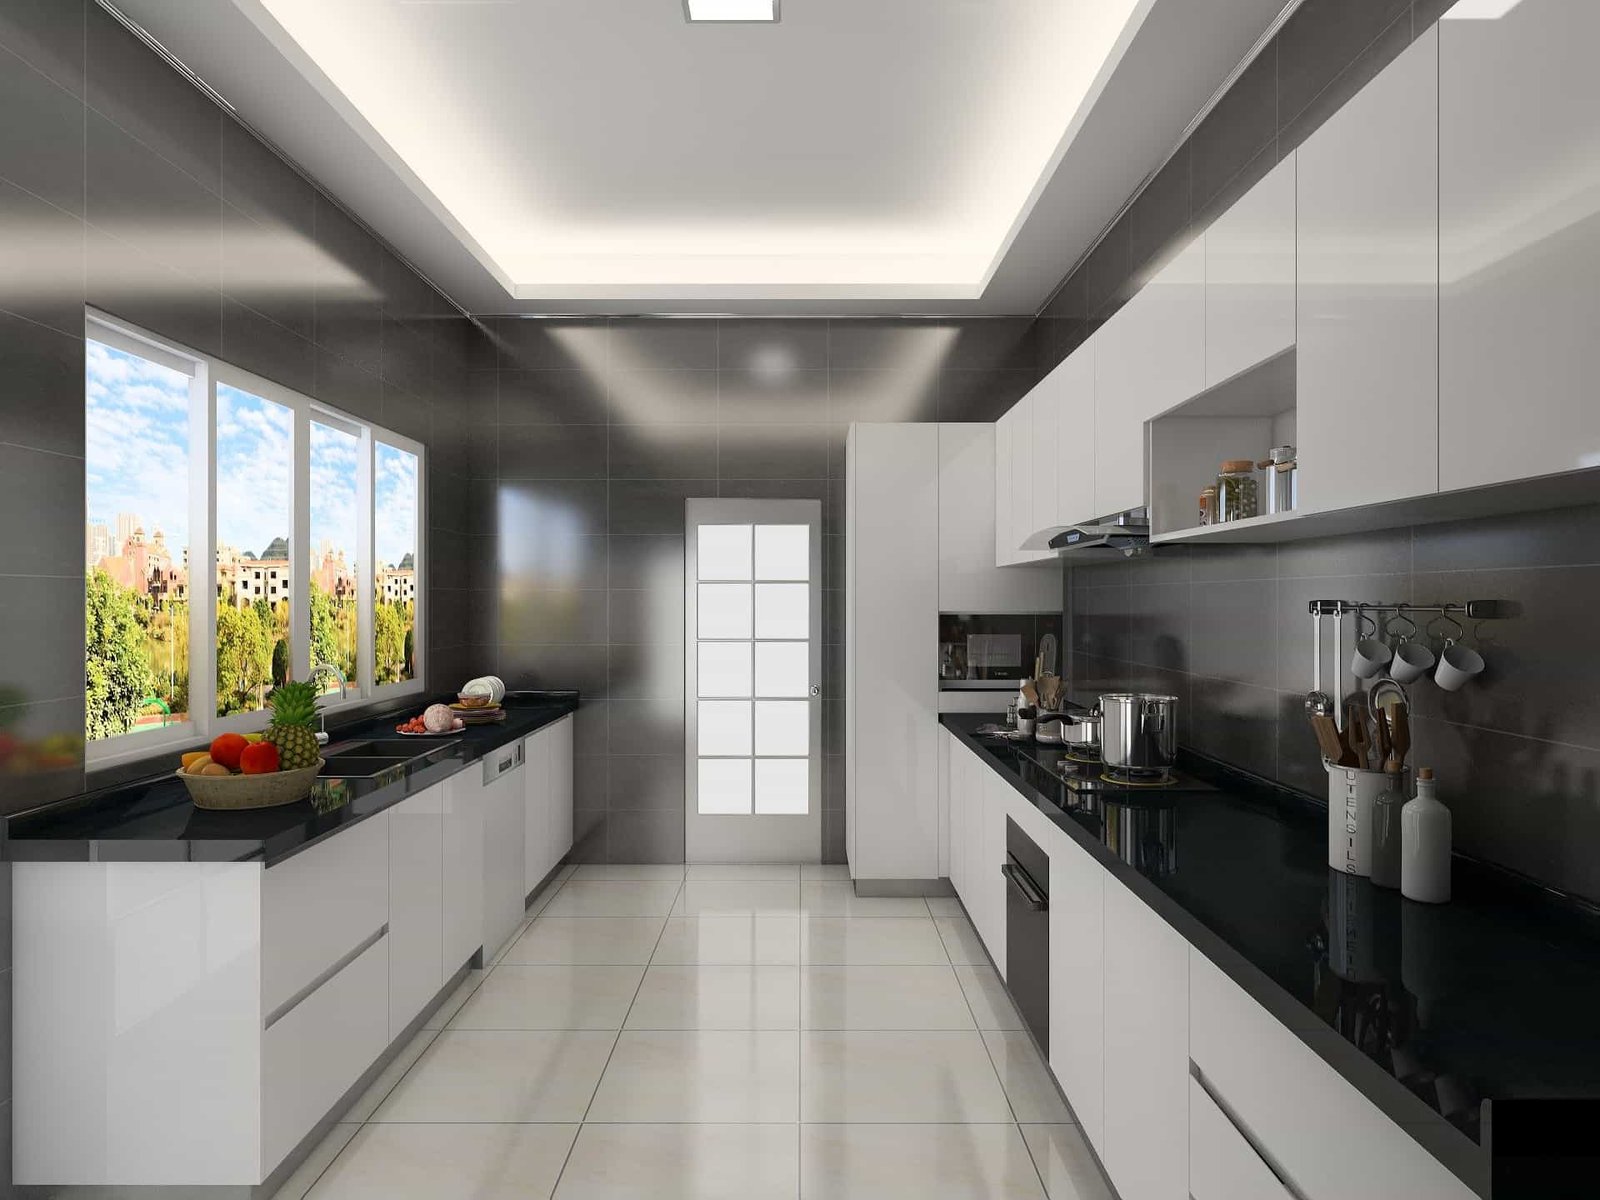 Modern-White-Lacquer-Gallery-Kitchen-Cabinets-1.jpg